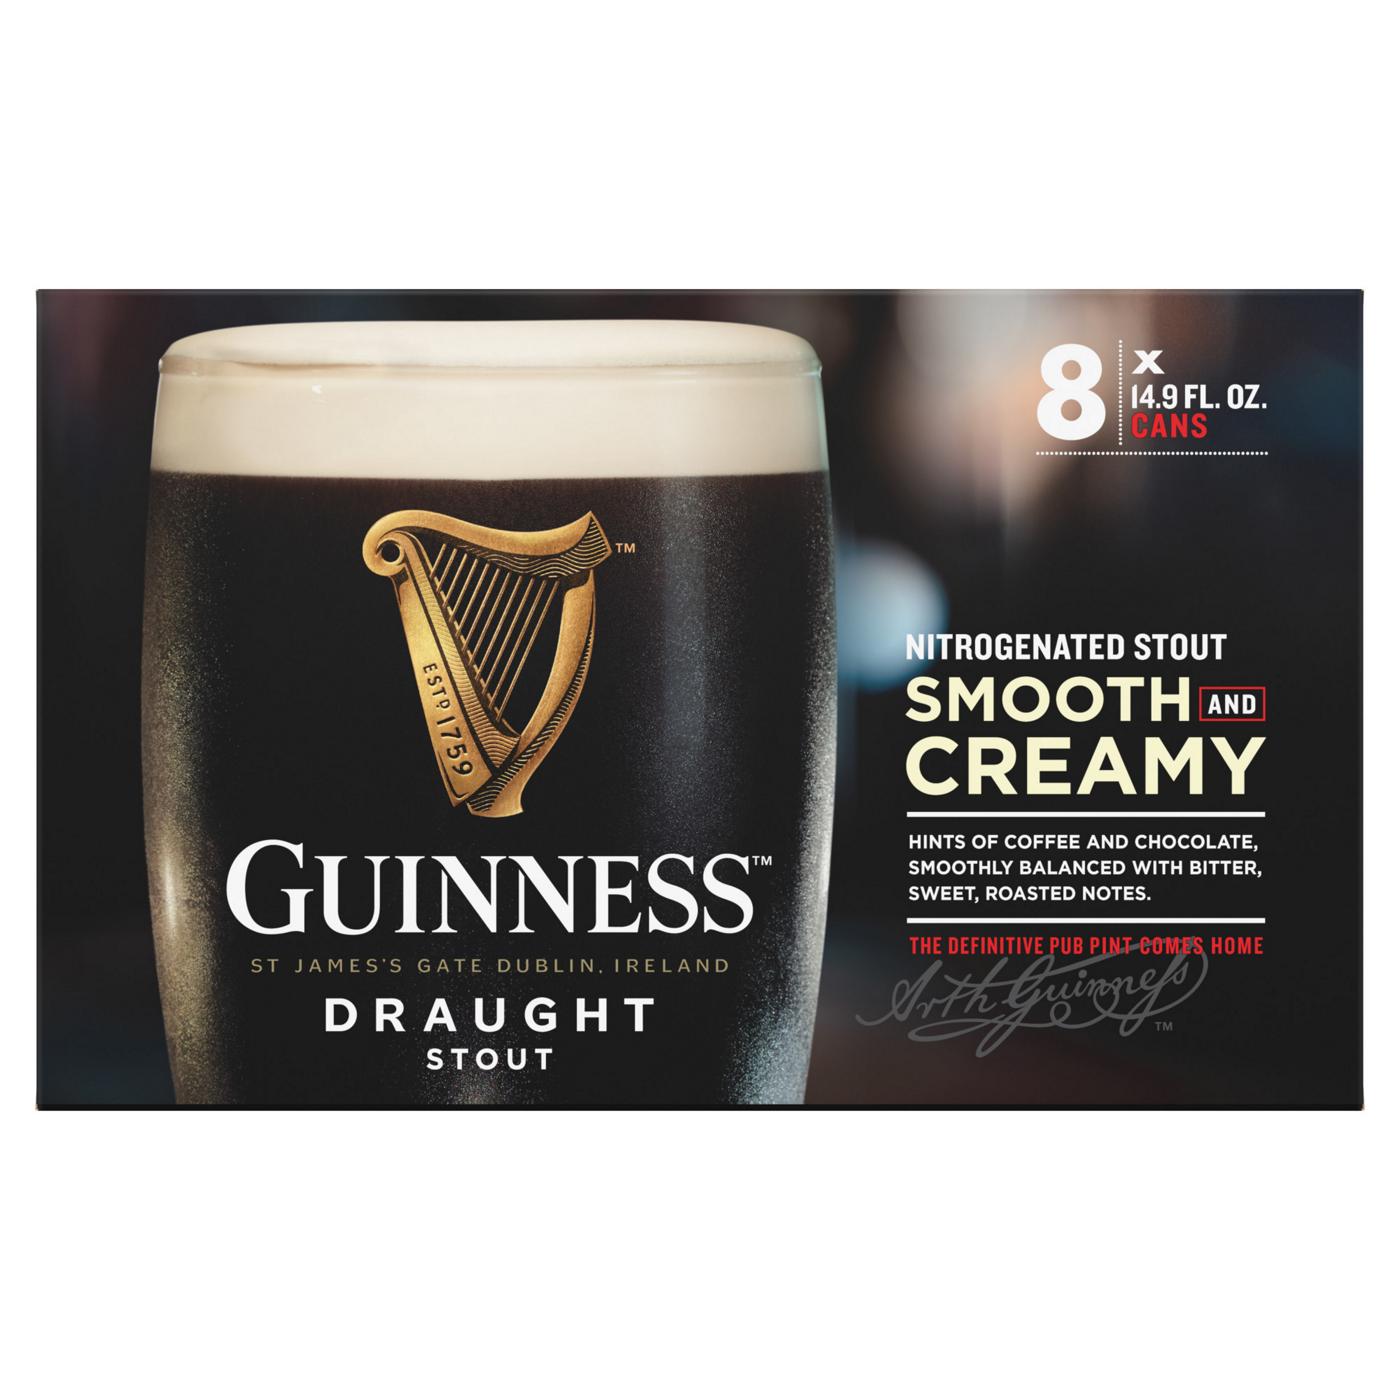 Guinness Draught Stout Beer; image 1 of 6